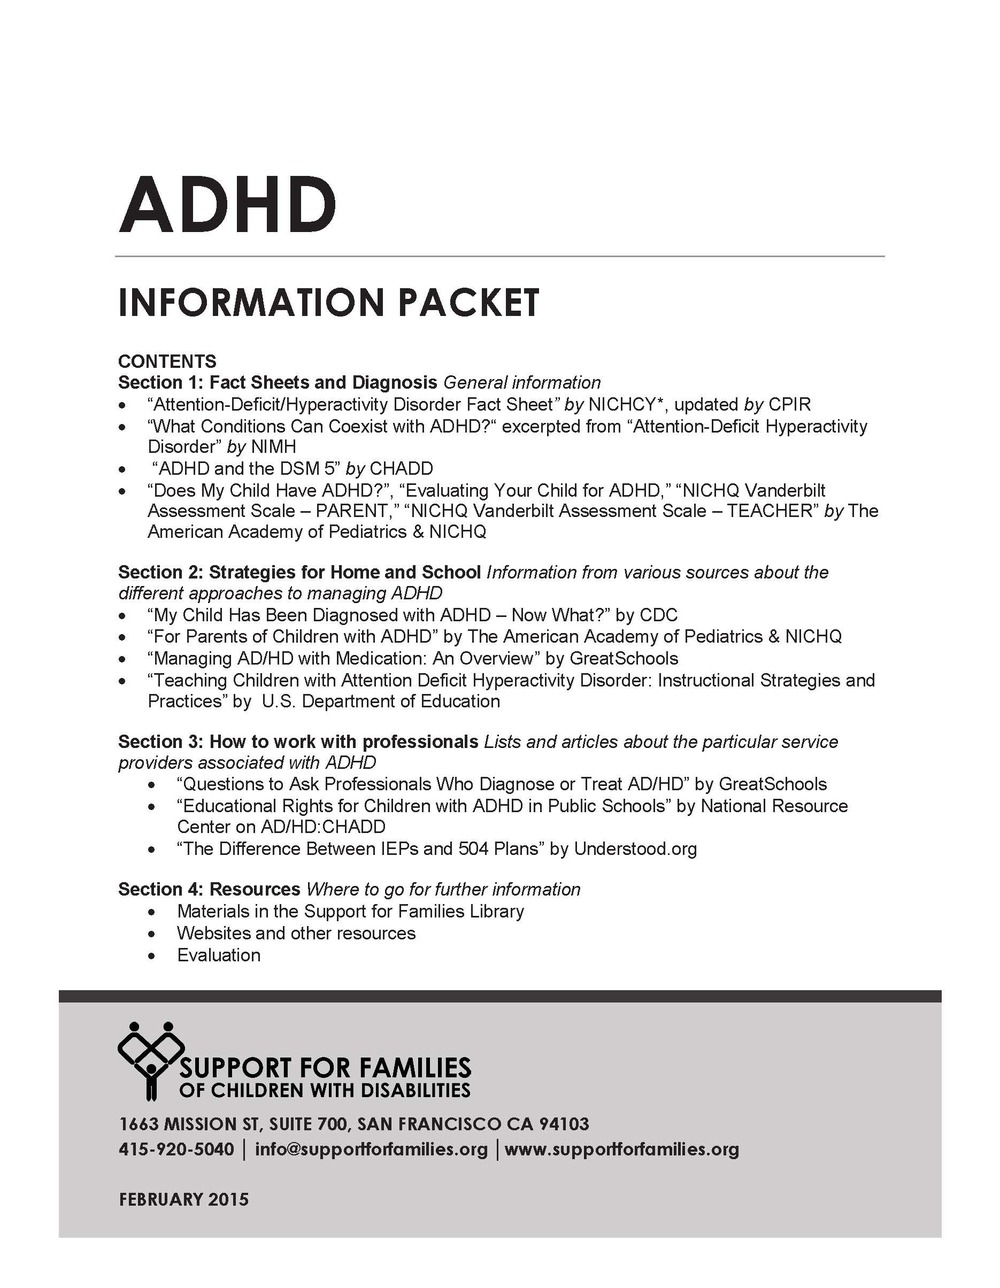 ADHD Info Packet — Support for Families of Children with Disabilities